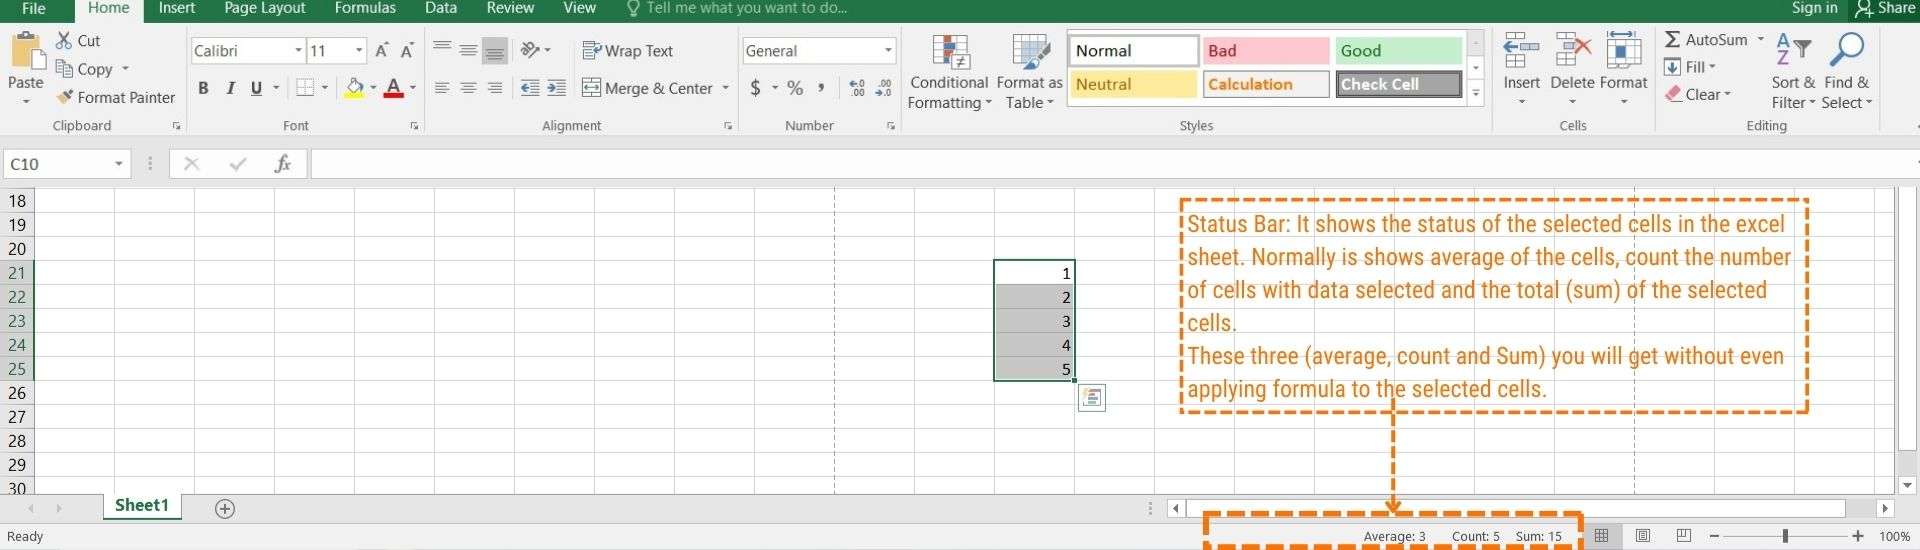 The Anatomy of MS Excel Spreadsheet - Status Bar - Beginner Course Module BE02